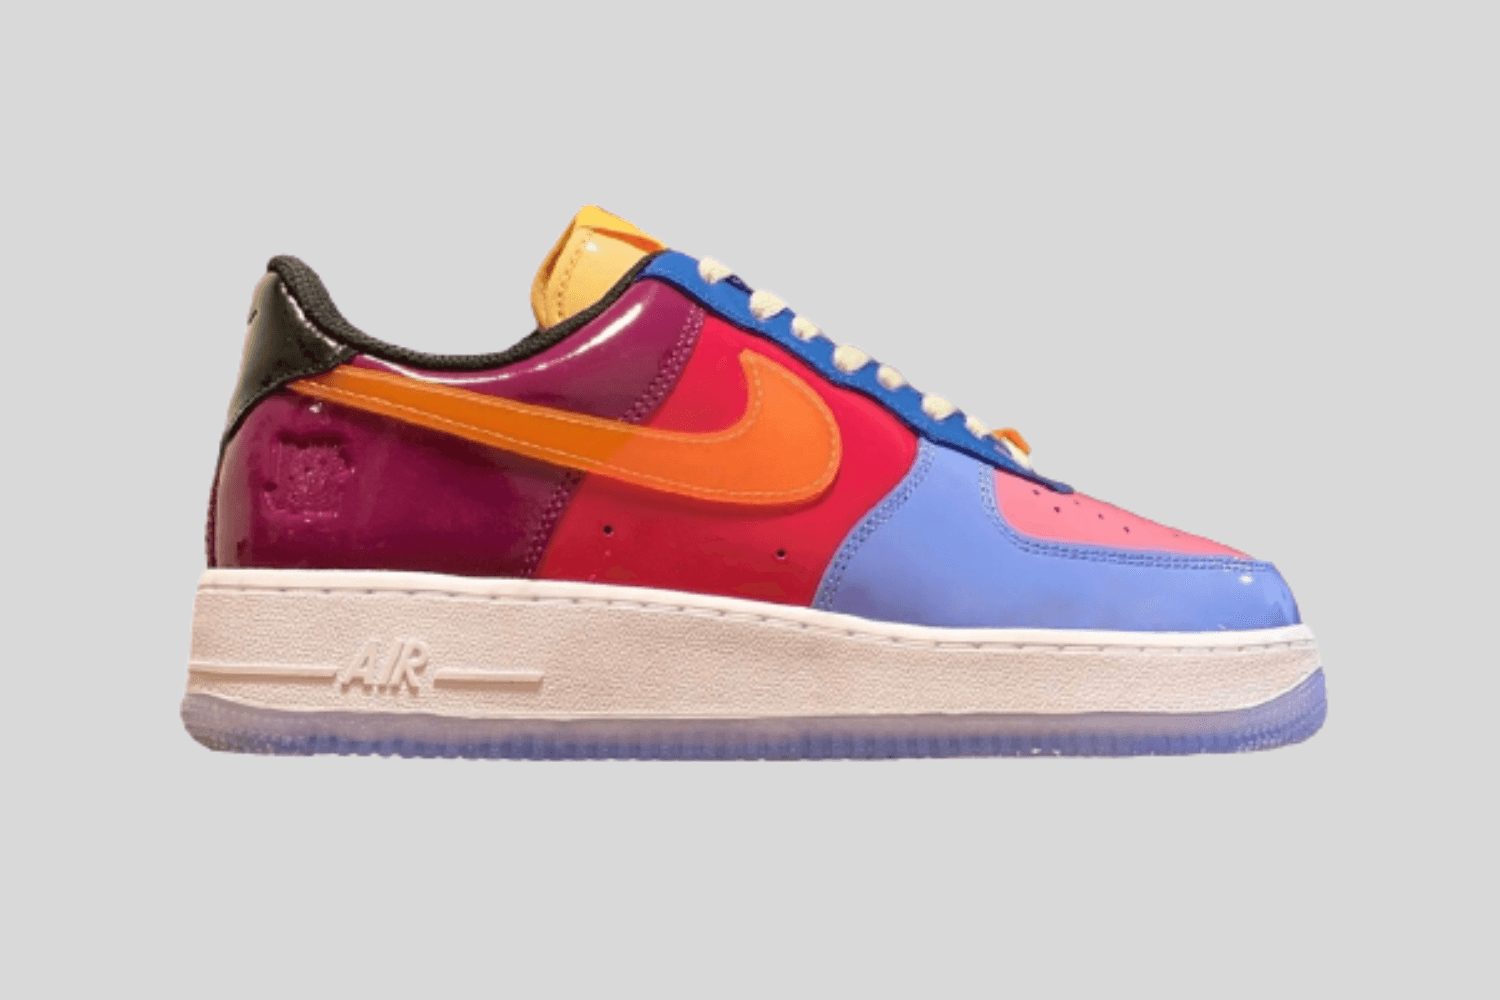 Alles zum UNDEFEATED x Nike Air Force 1 Low 'Multi-Patent'